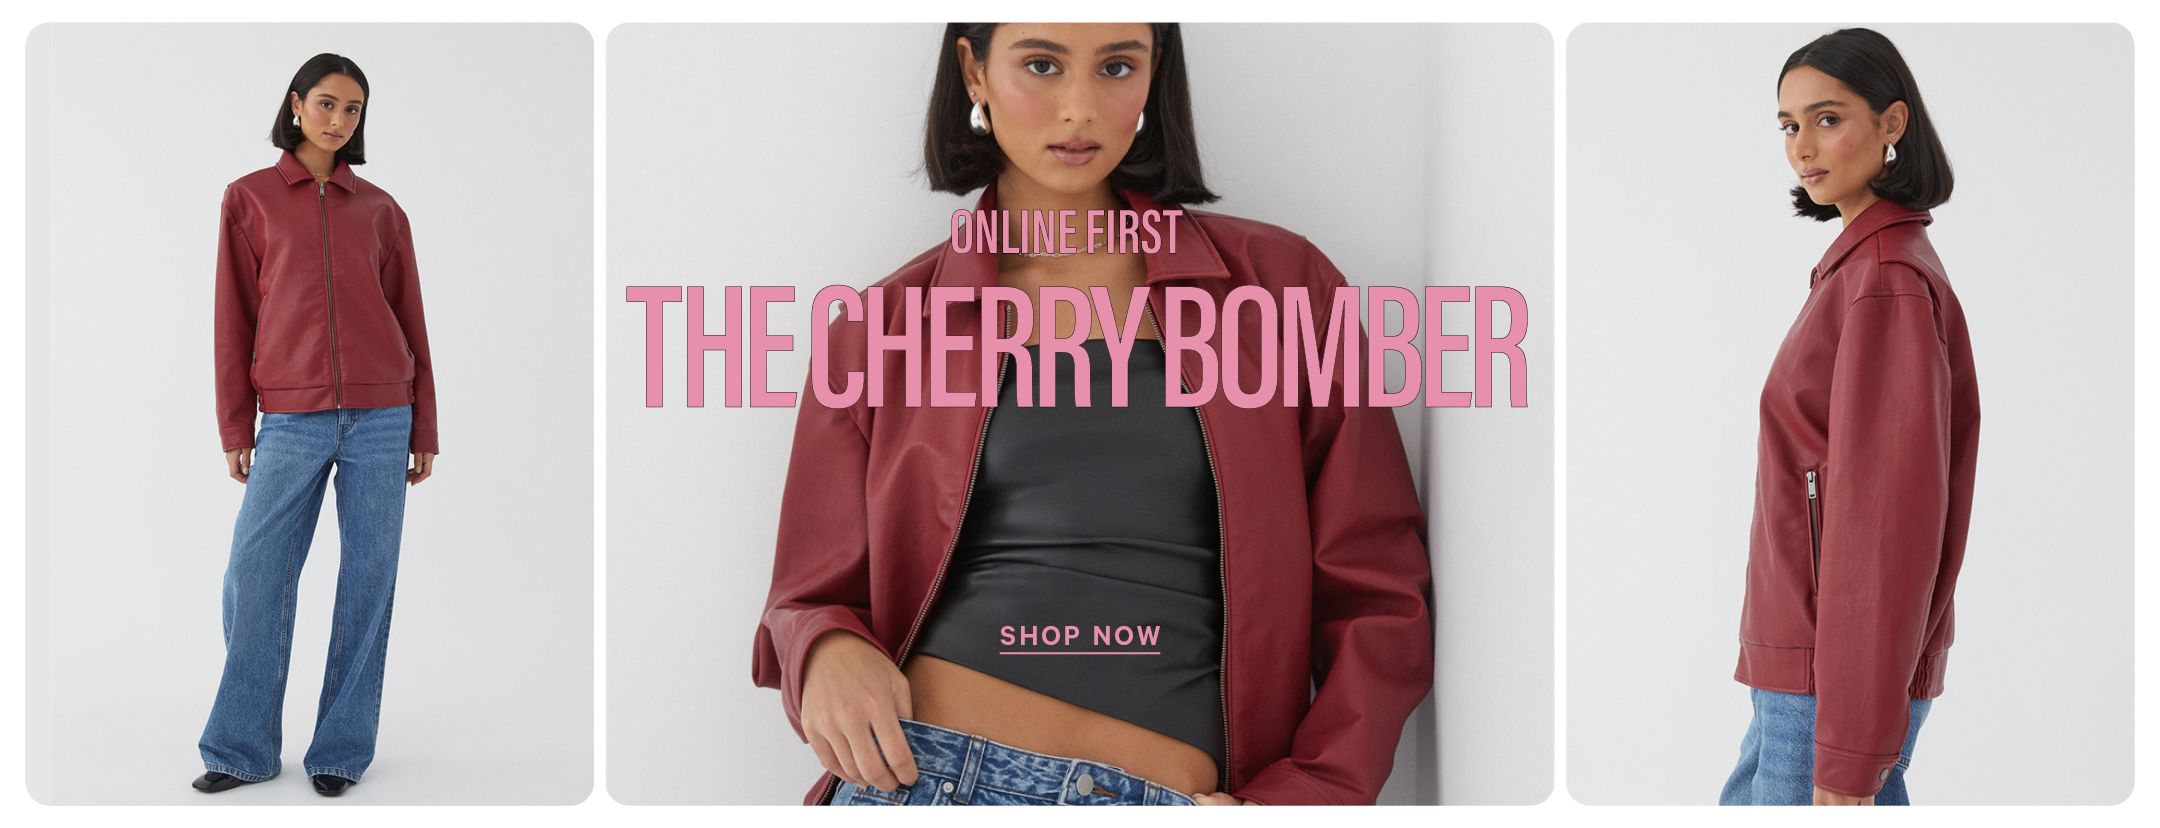 Shop Online First: The Cherry Bomber